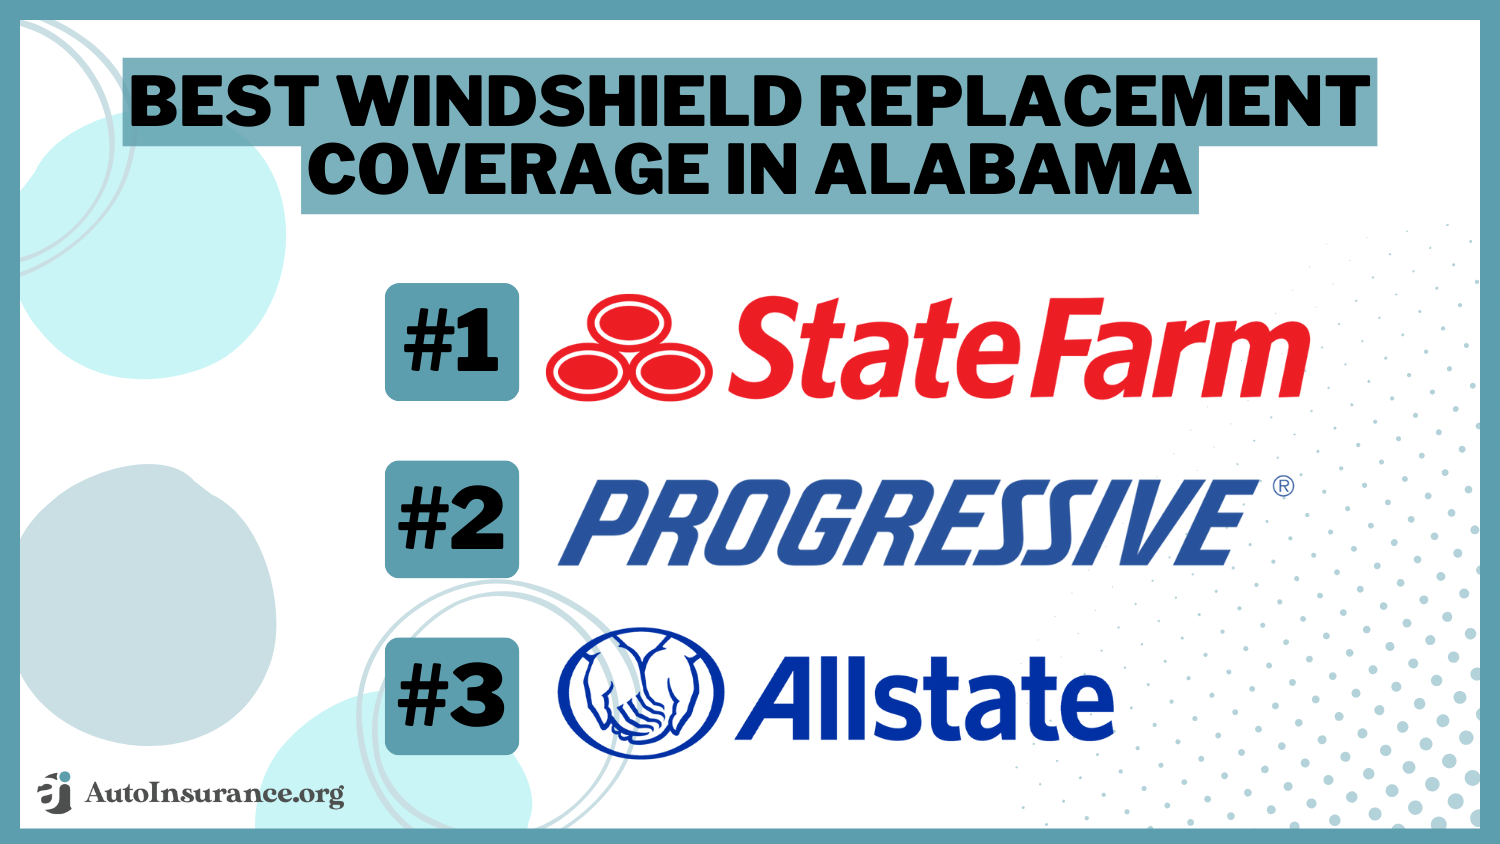 Best Windshield Replacement Coverage in Alabama: State Farm, Progressive, and Allstate